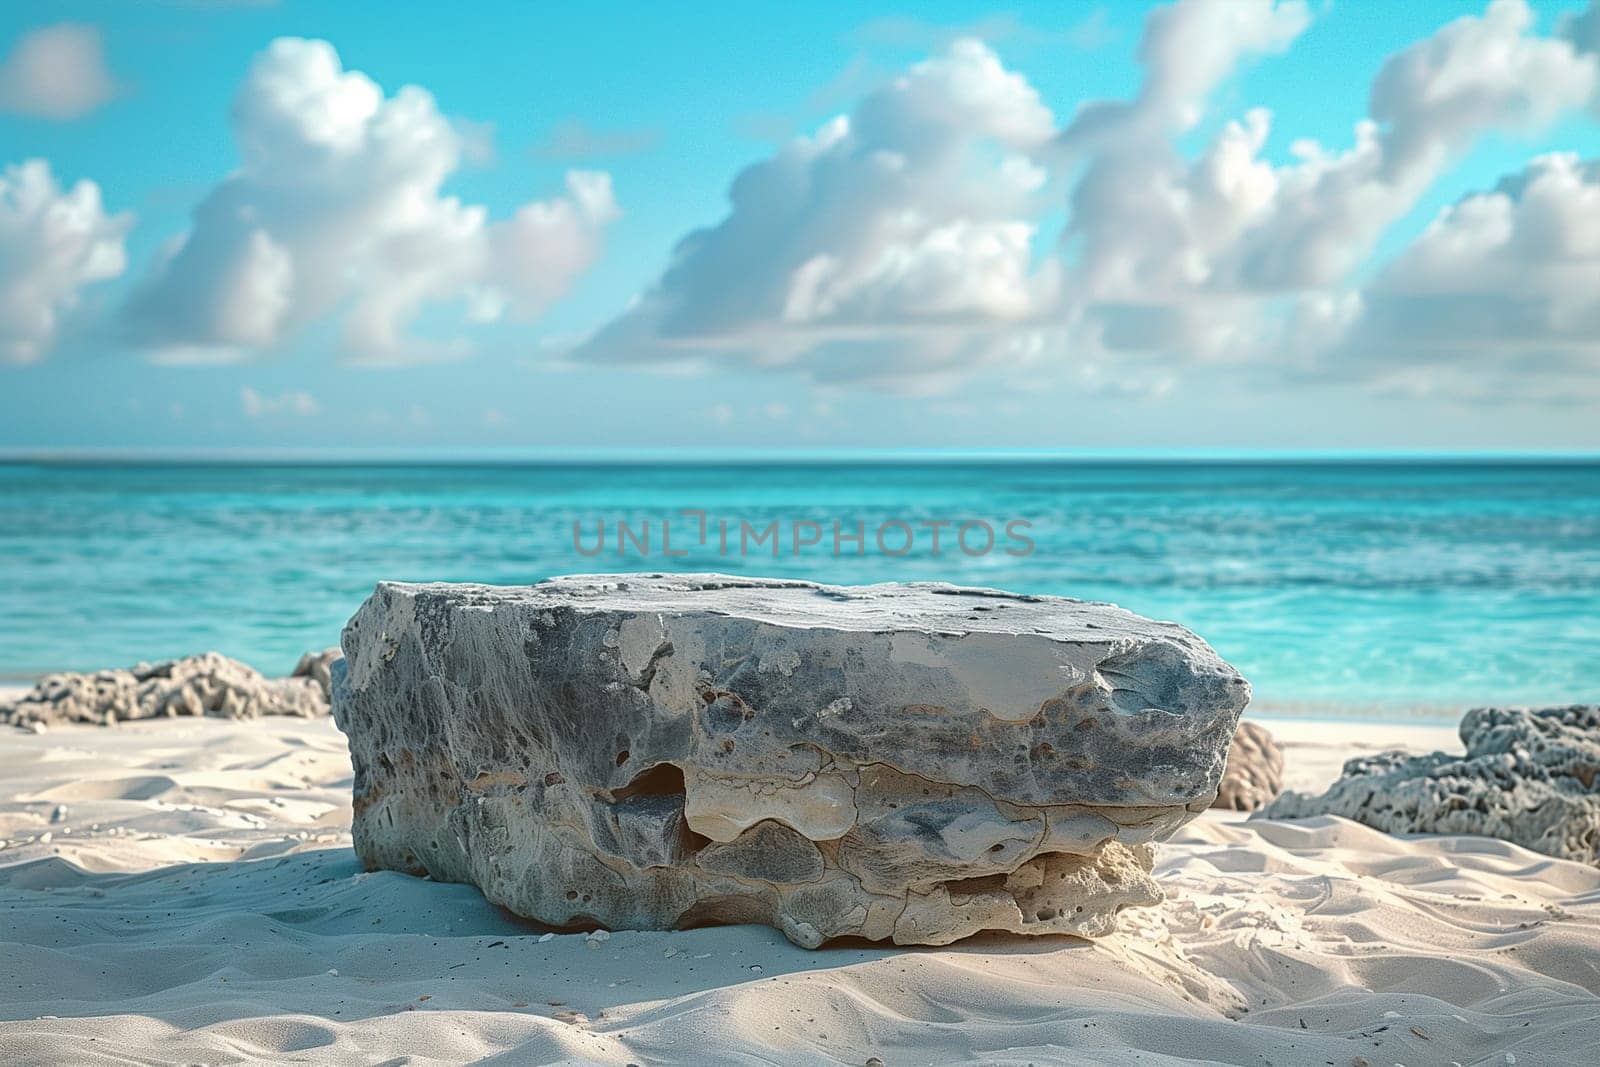 A rock sits on top of a sandy beach, blending in with the natural surroundings.